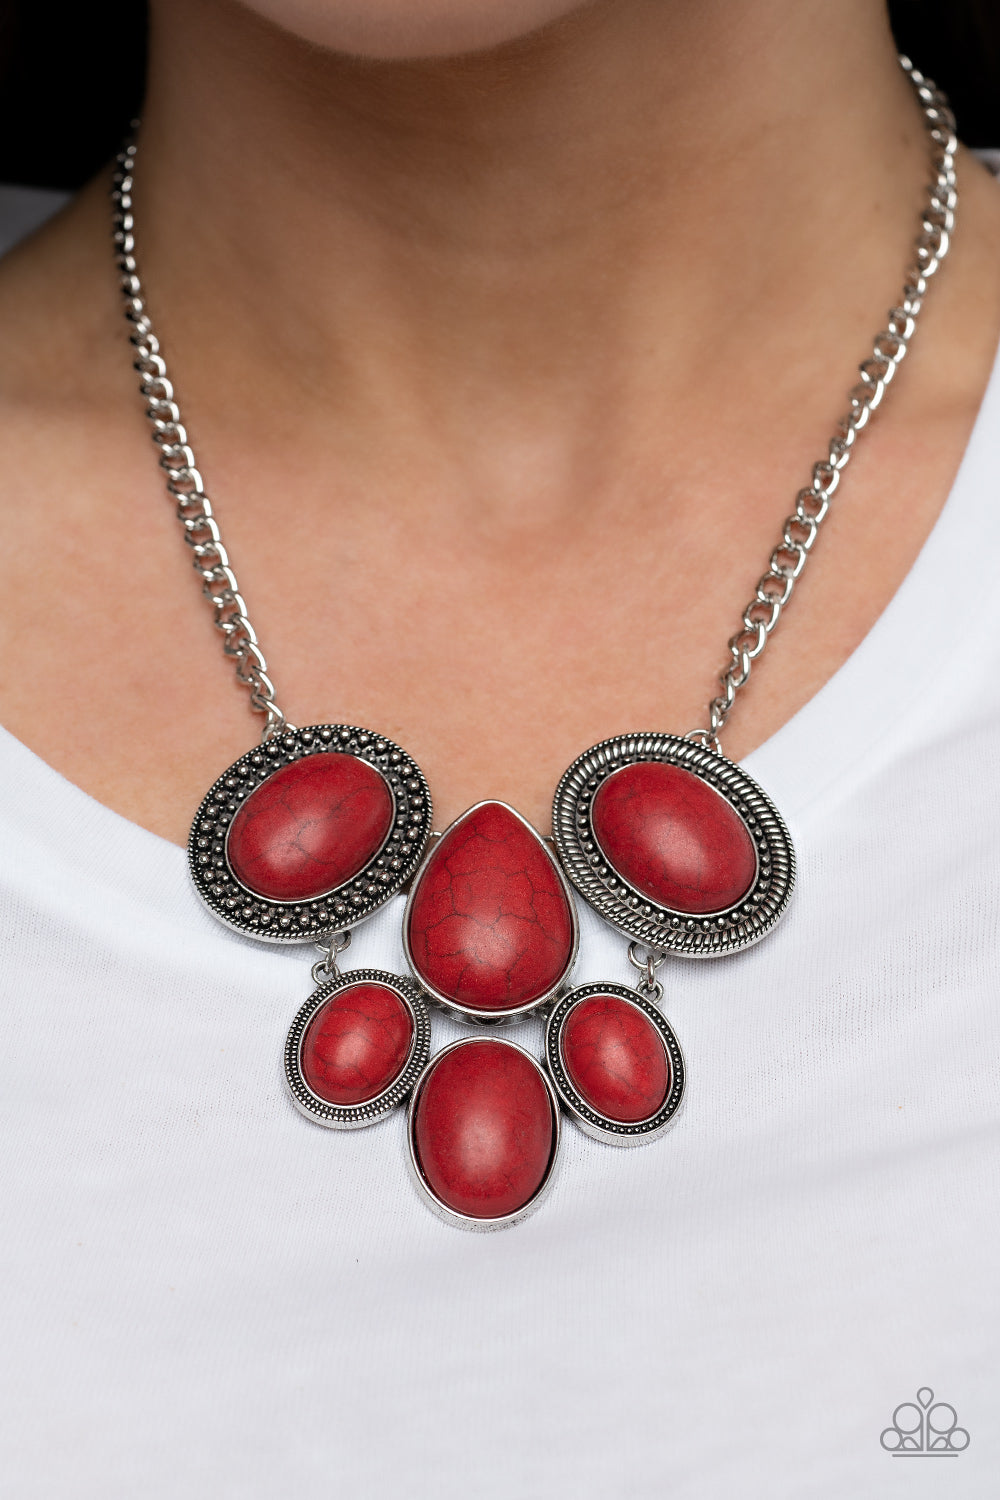 All-Natural Nostalgia - Red Necklace